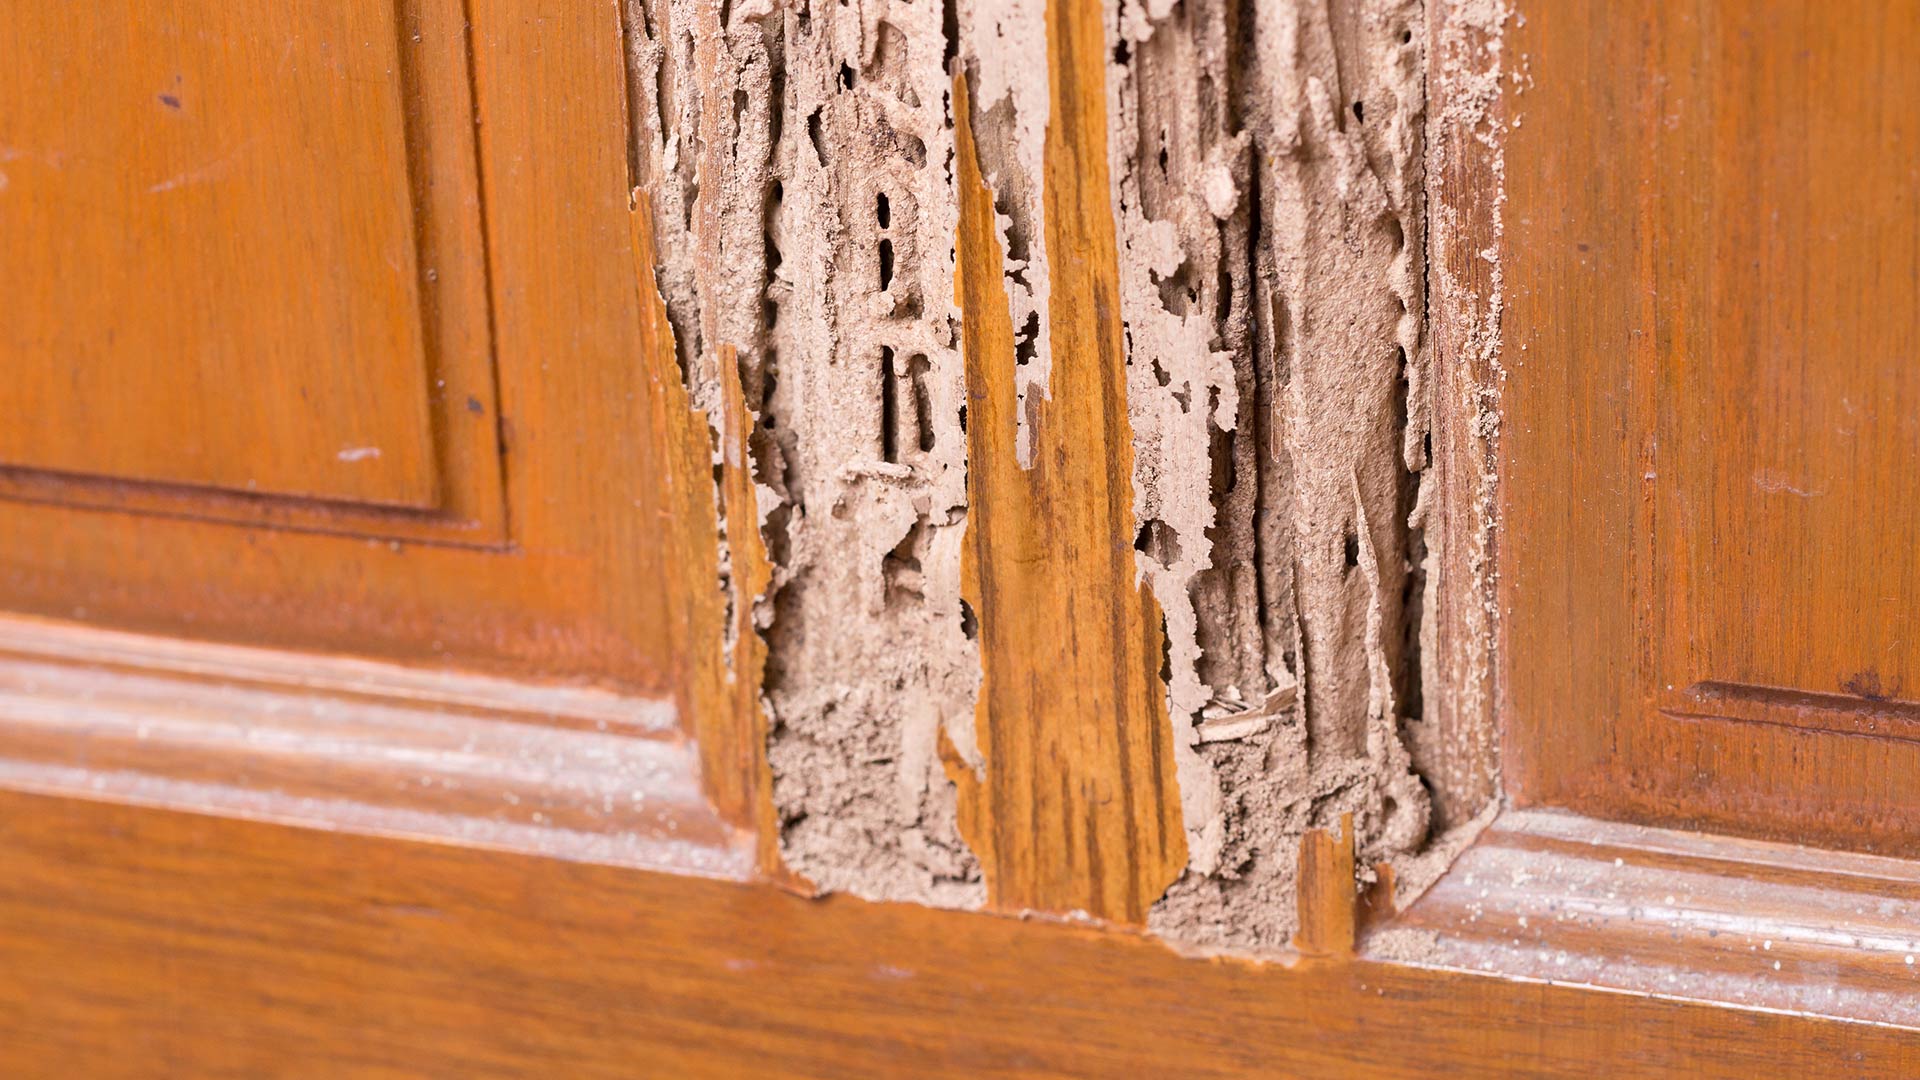 termite-damage-on-door-residential-building-staten-island-ny